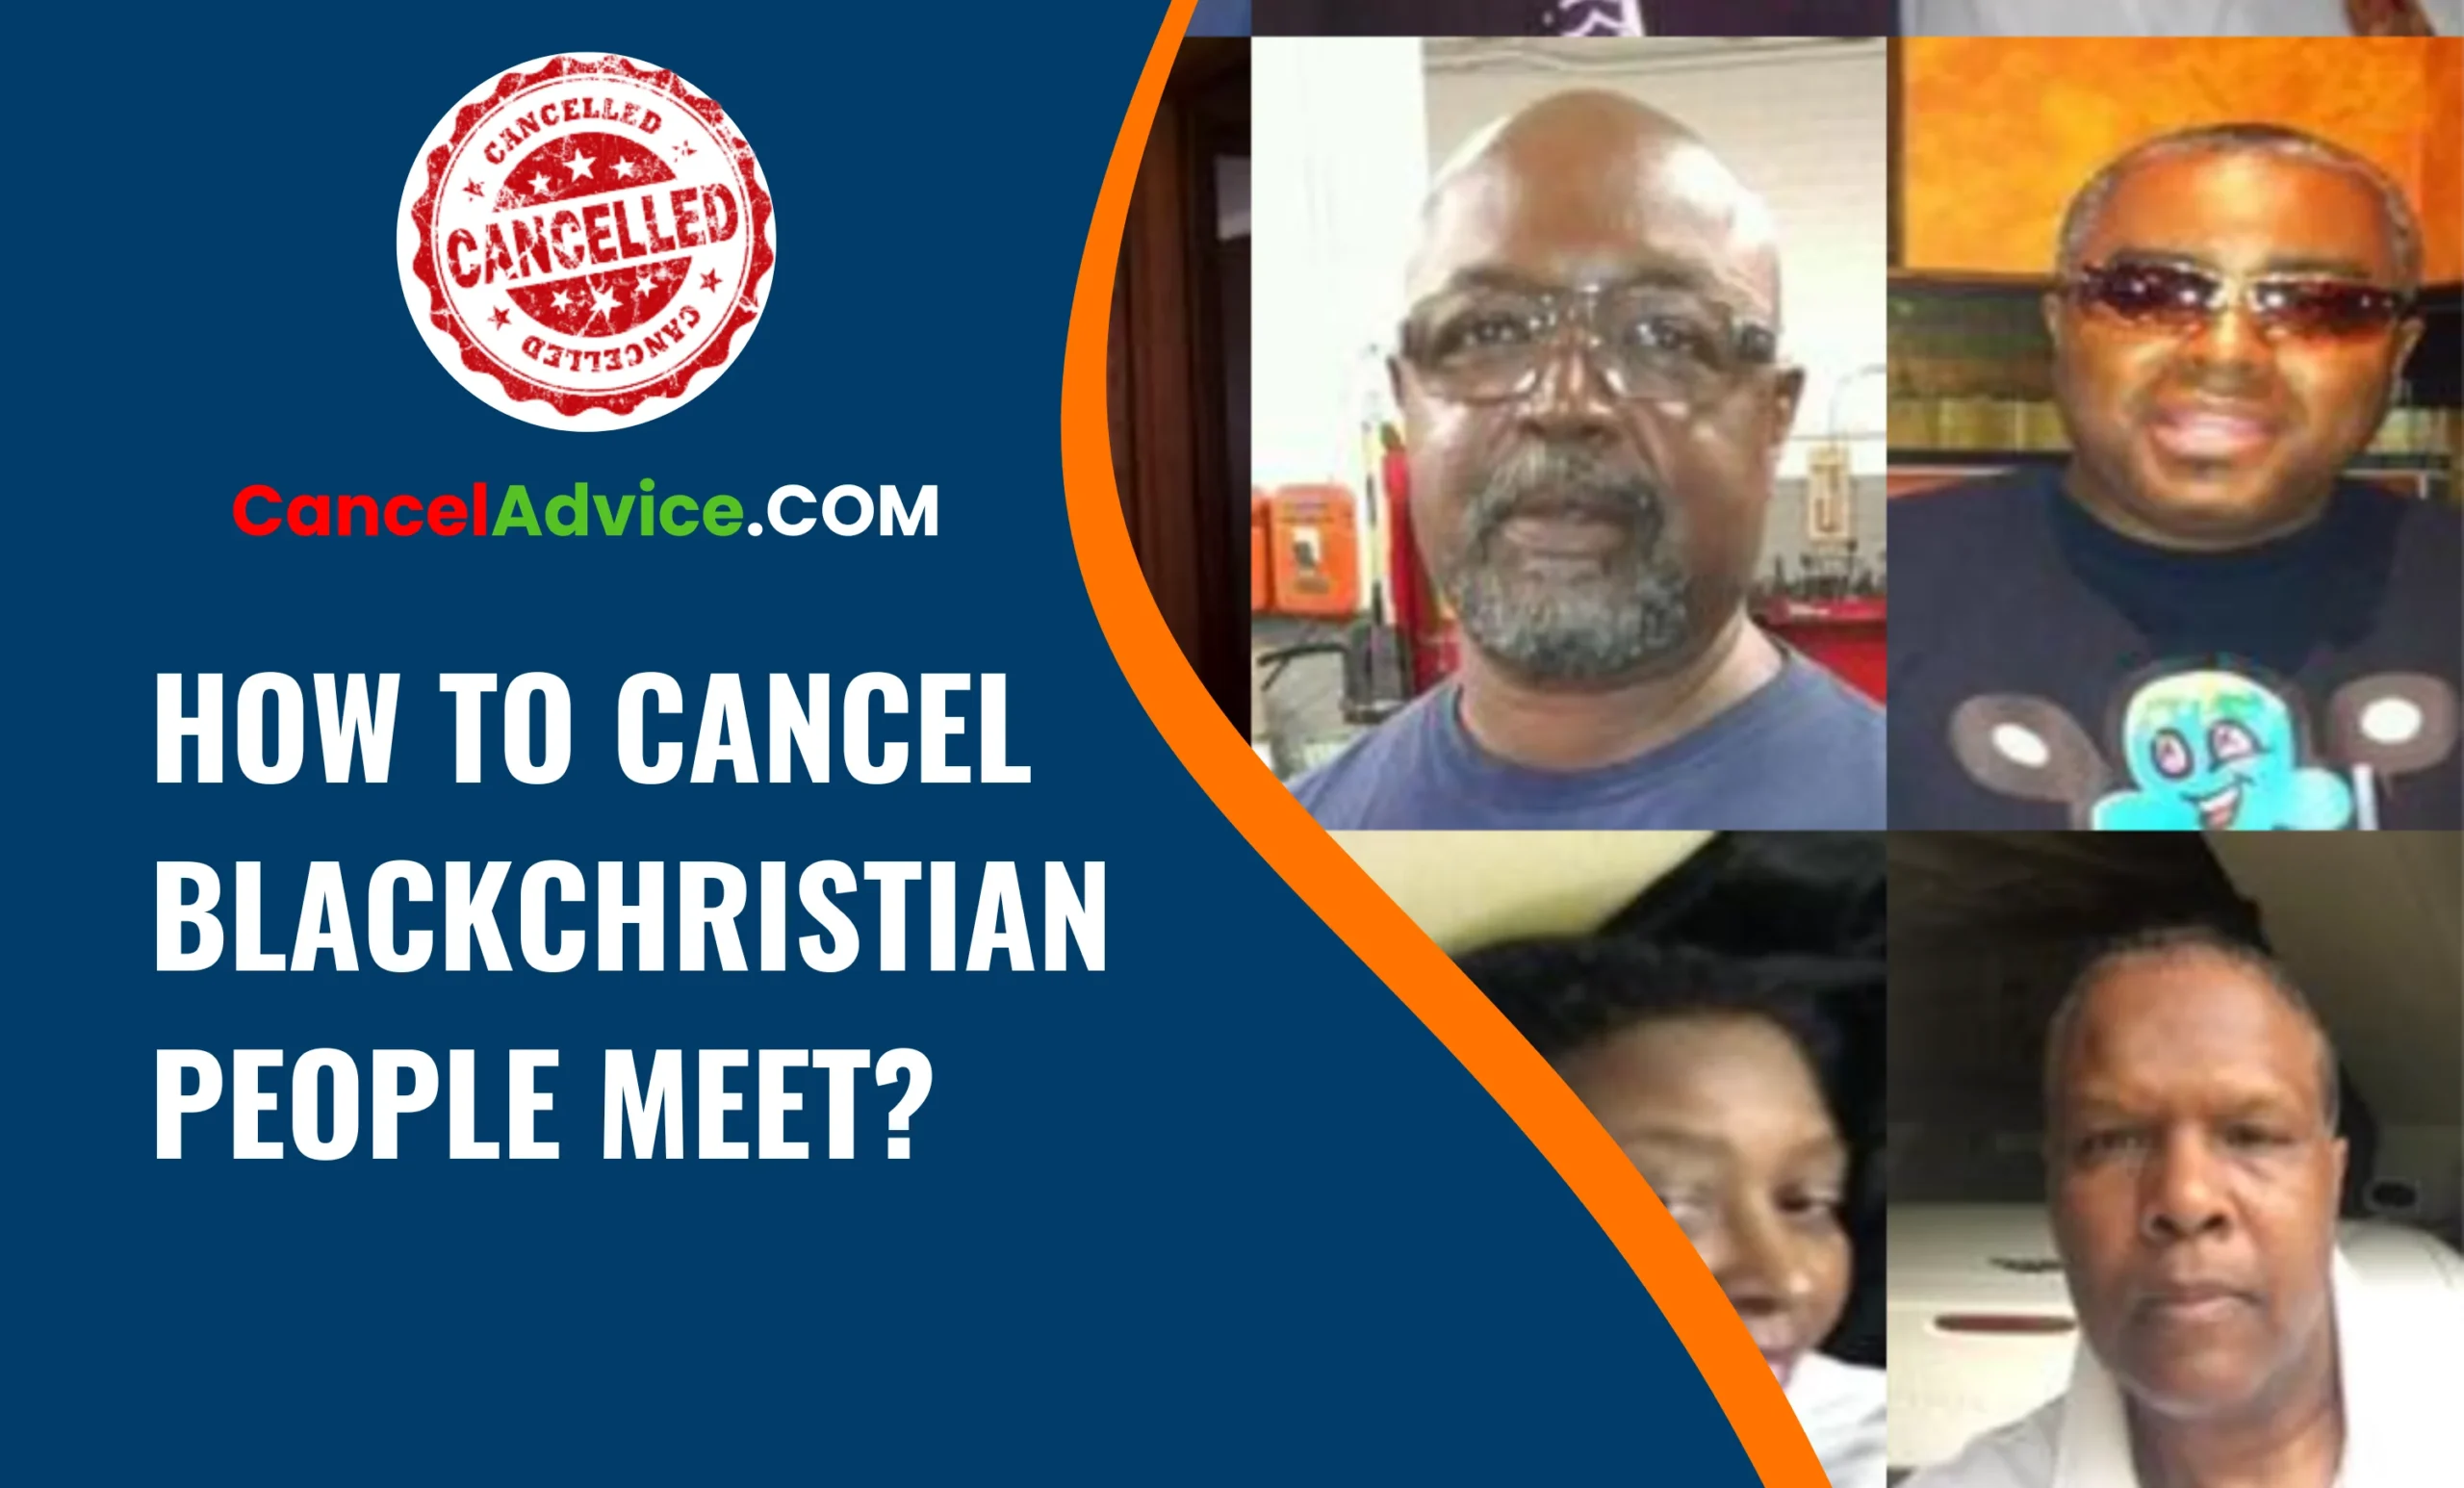 How To Cancel BlackChristianPeopleMeet